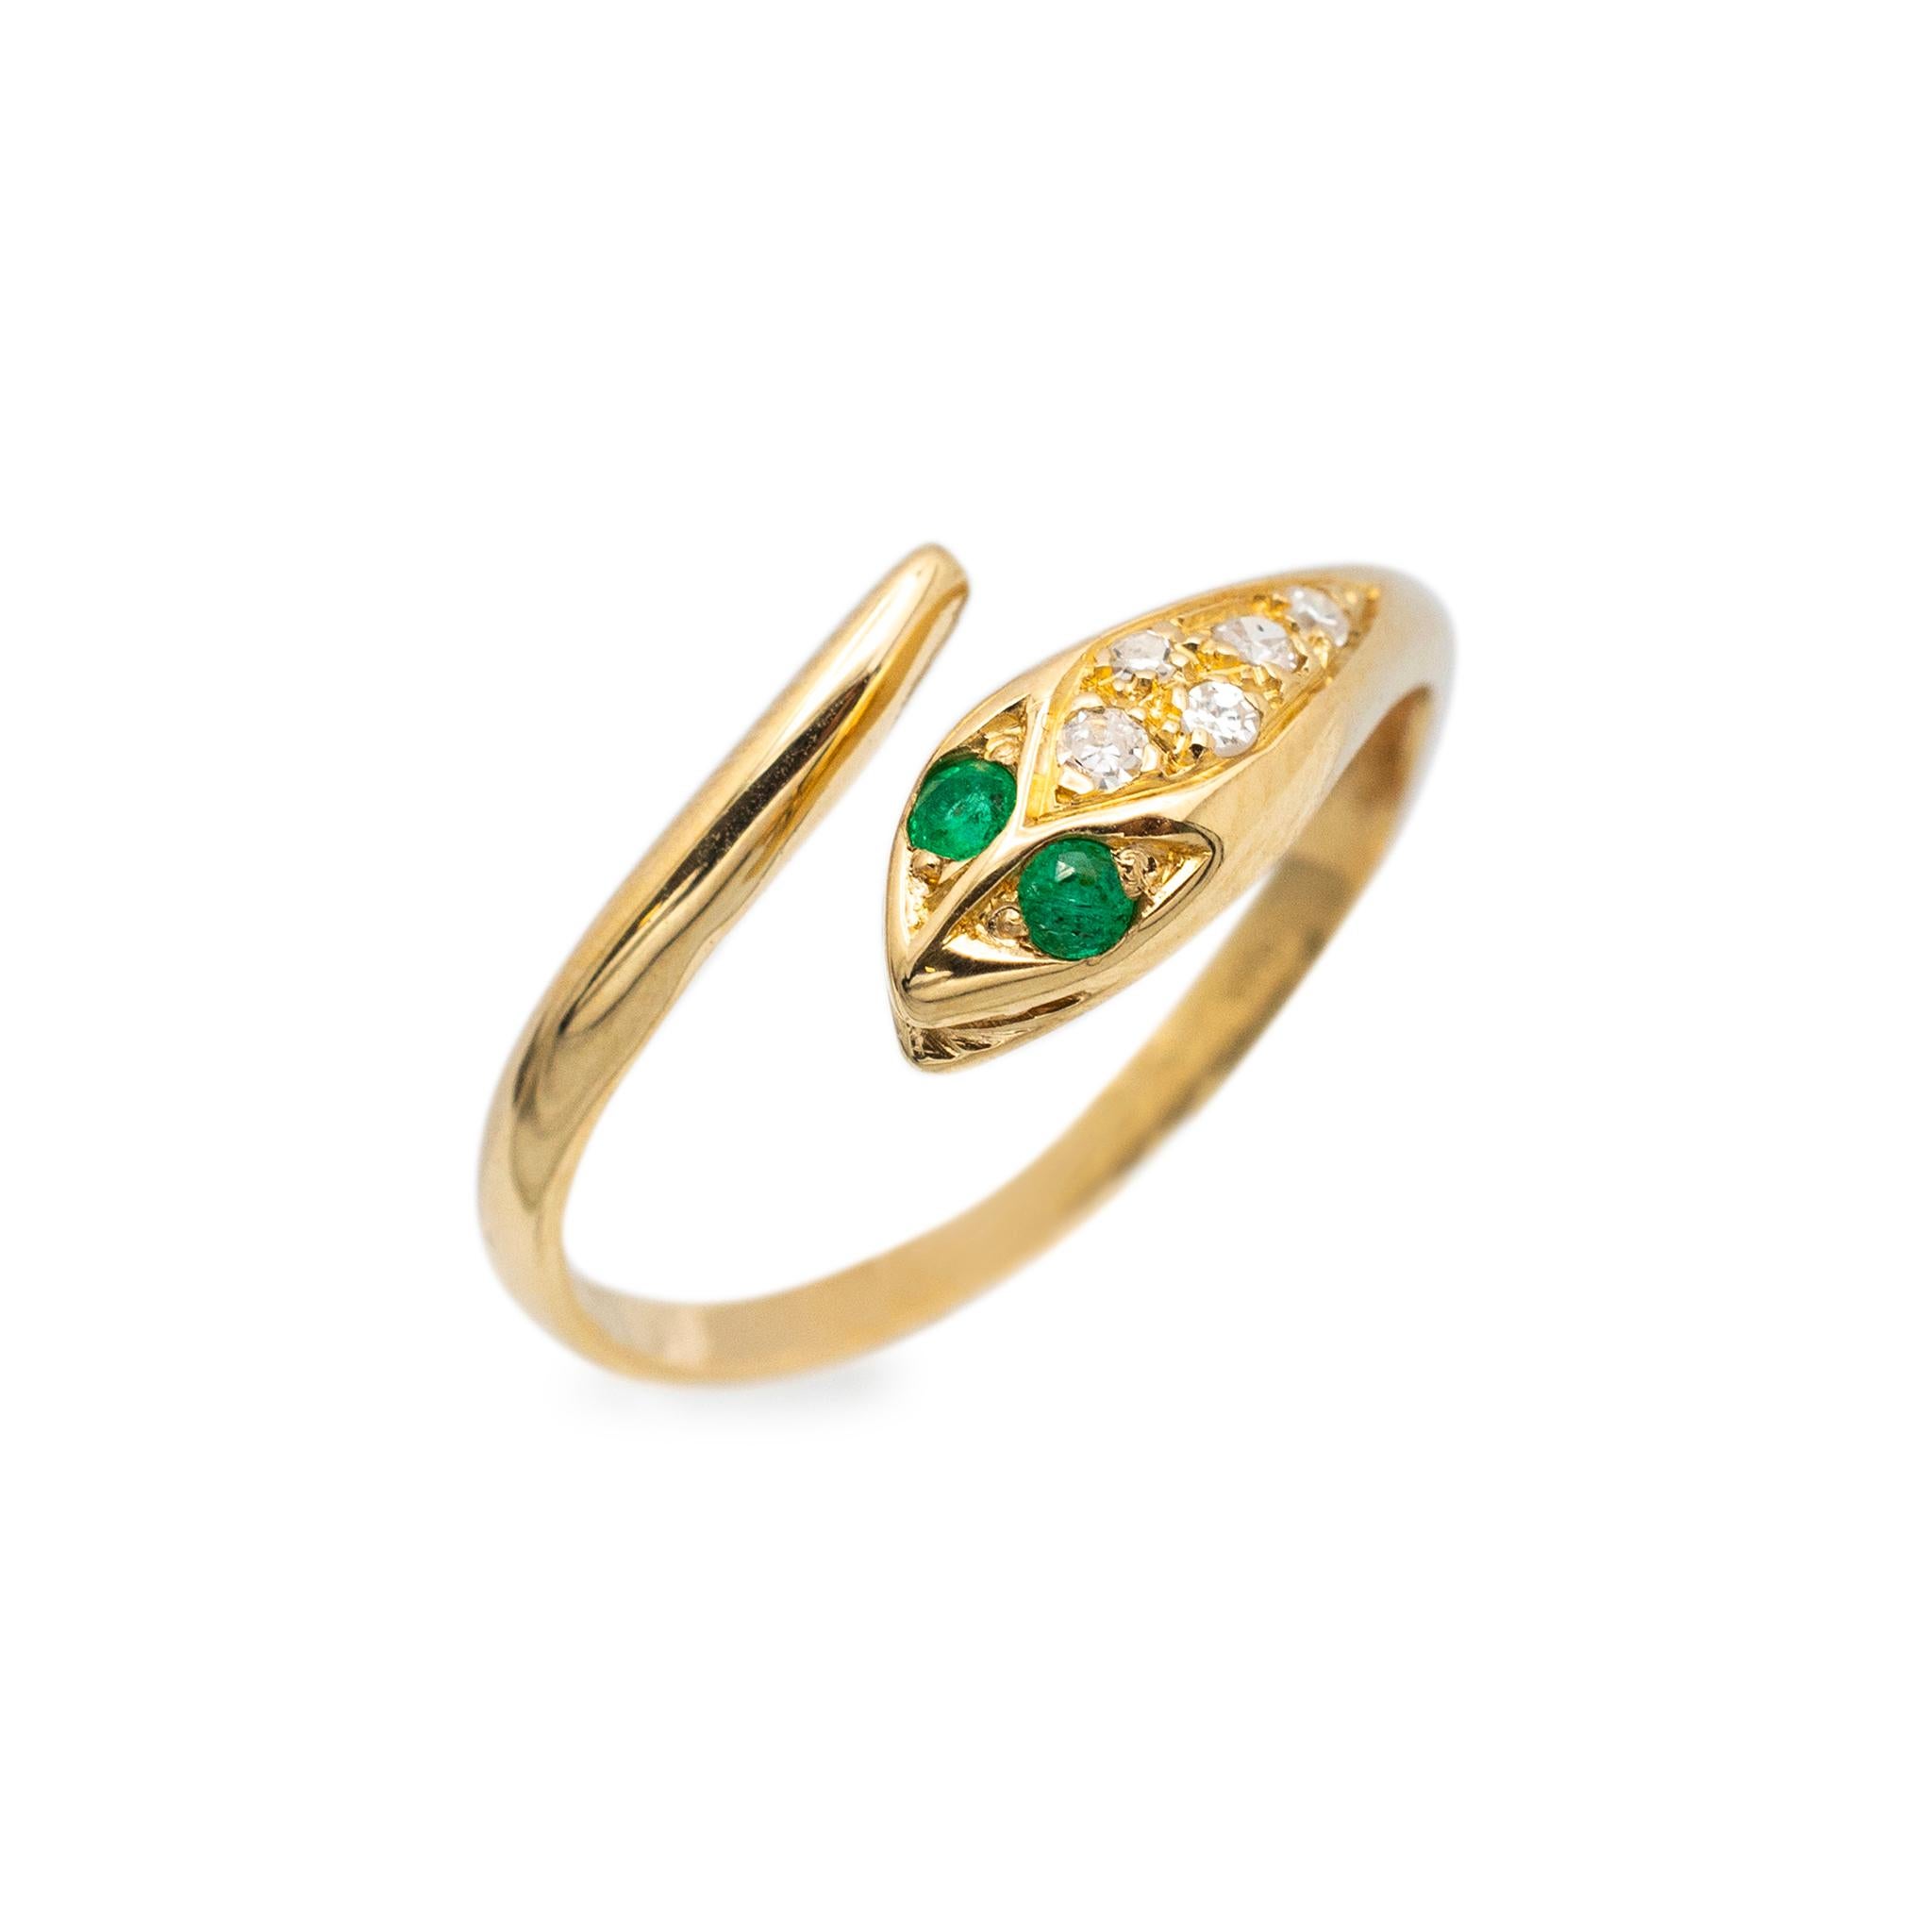 Gender: Ladies

Metal Type: 18K Yellow Gold

Size: 8

Shank Maximum Width: 8.45 mm

Weight: 2.33 grams

Ladies 18K yellow gold diamond and emerald cocktail ring with a half round shank. The metal was tested and determined to be 18K yellow gold.